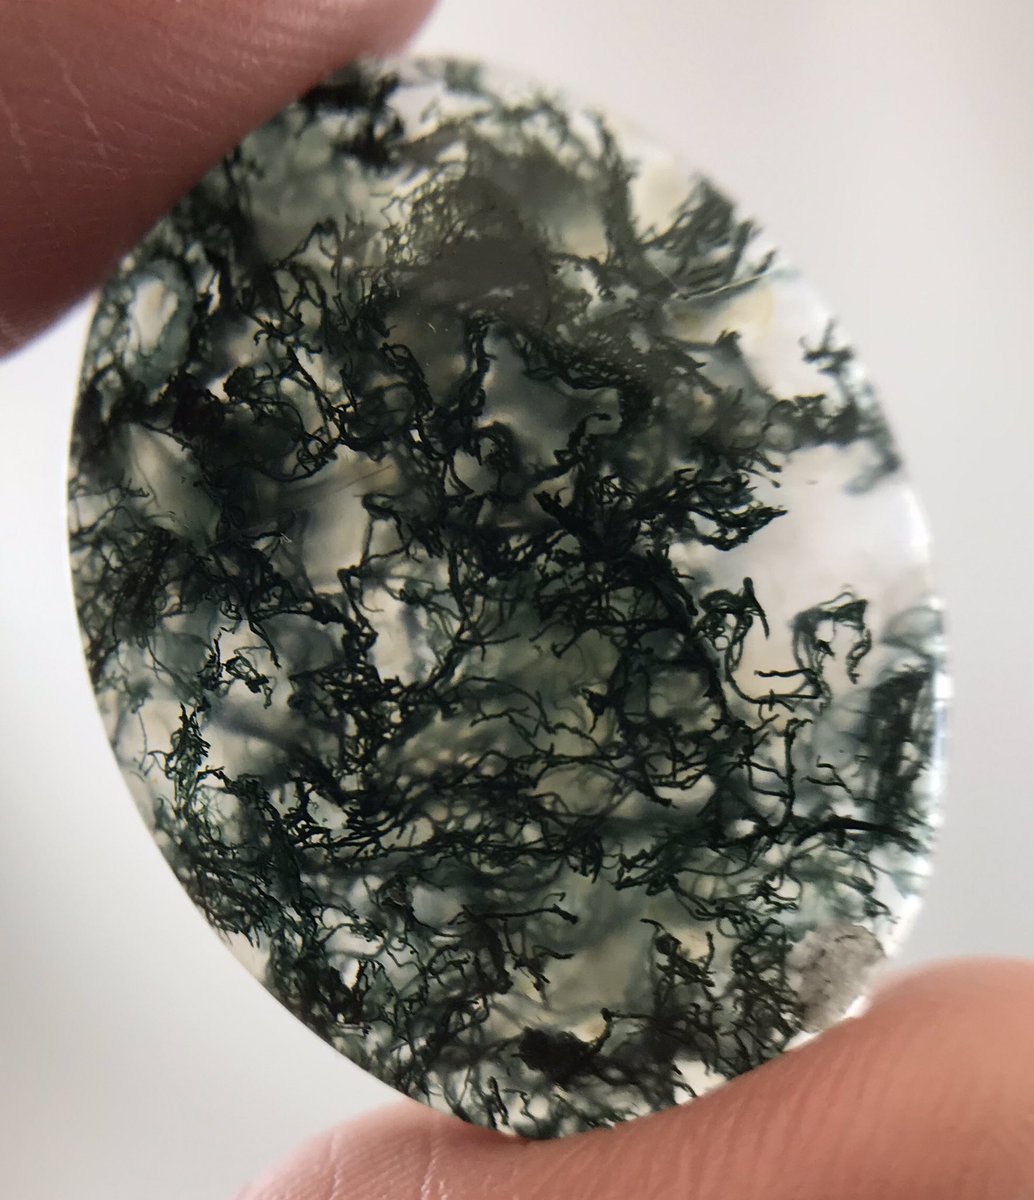 PS: Here's a better pic of the last one since a few people suggested it might be moss agate. I'm pretty sure it's fibers in glass to make it look like moss agate, it's kinda clever.